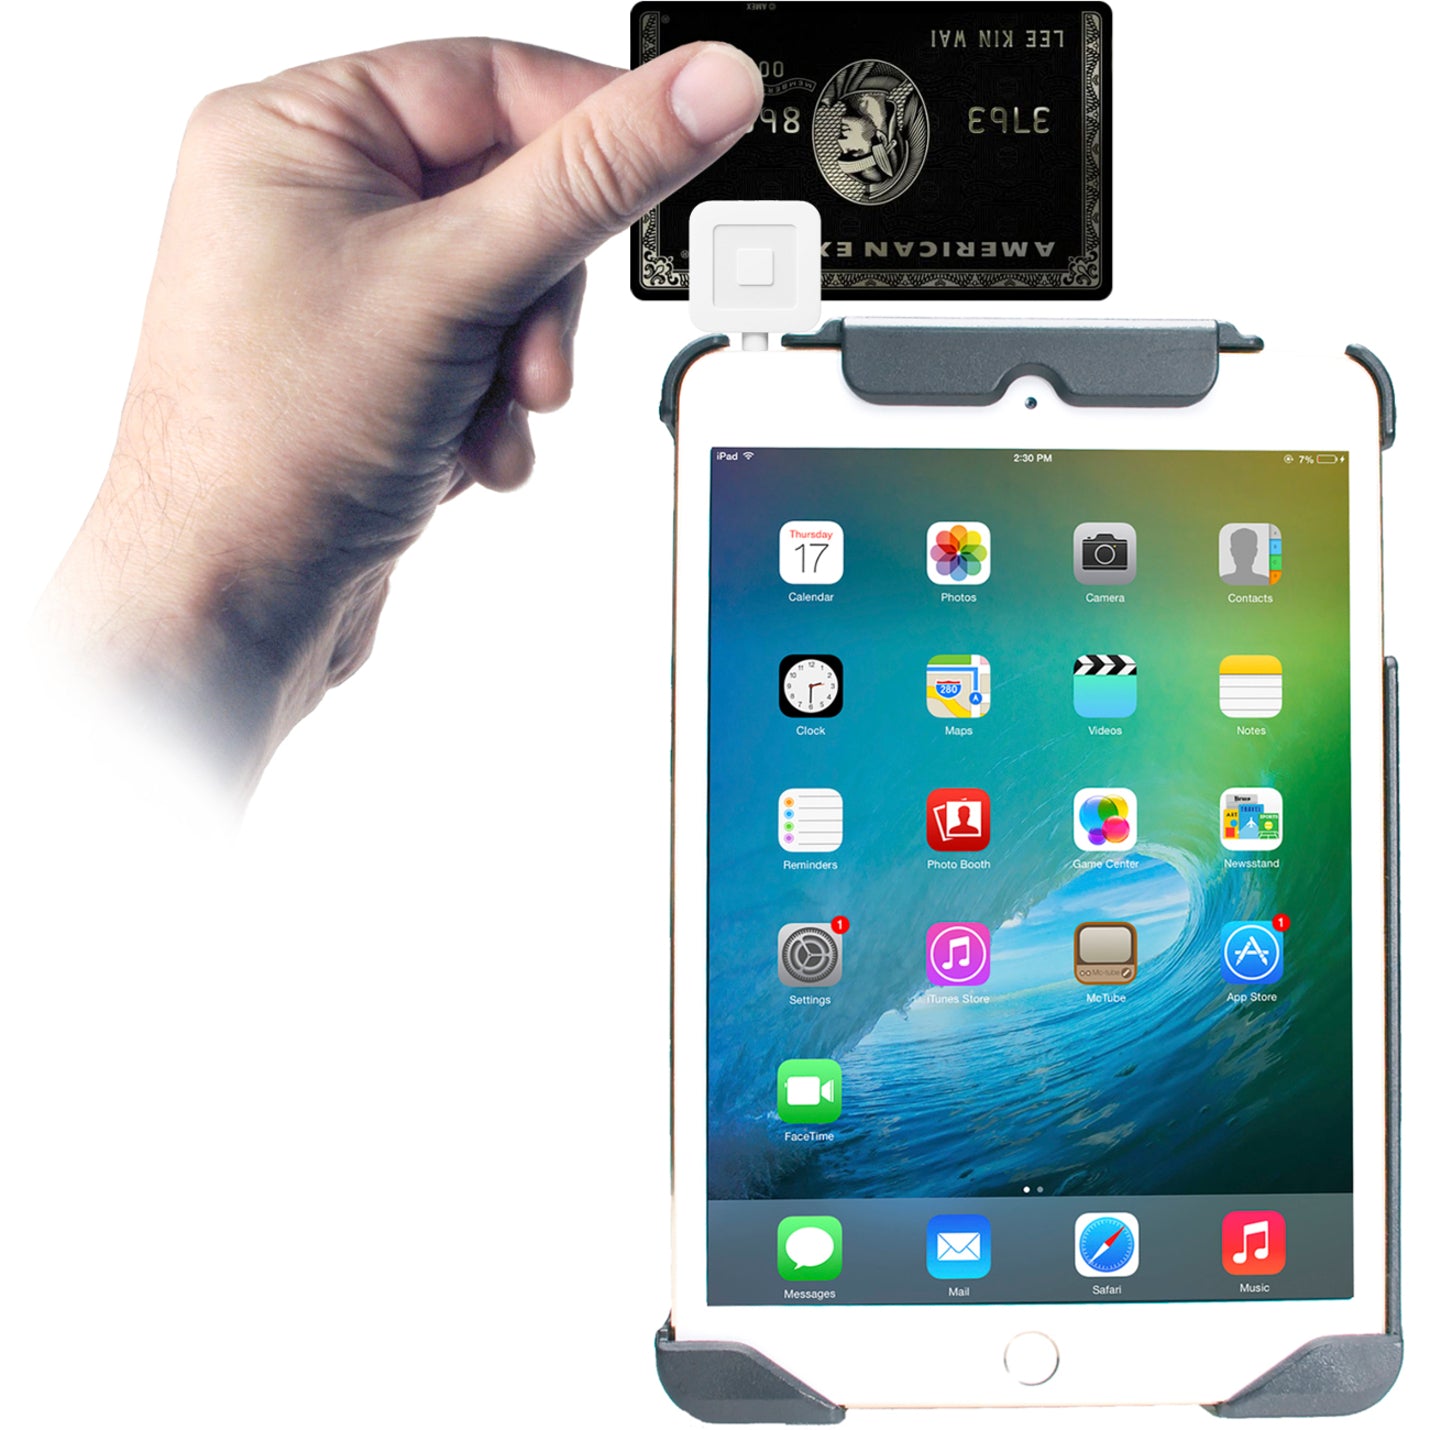 CTA Digital PAD-ACGM Anti-Theft Case with Built-In Grip Stand for iPad mini, Secure and Convenient Protection